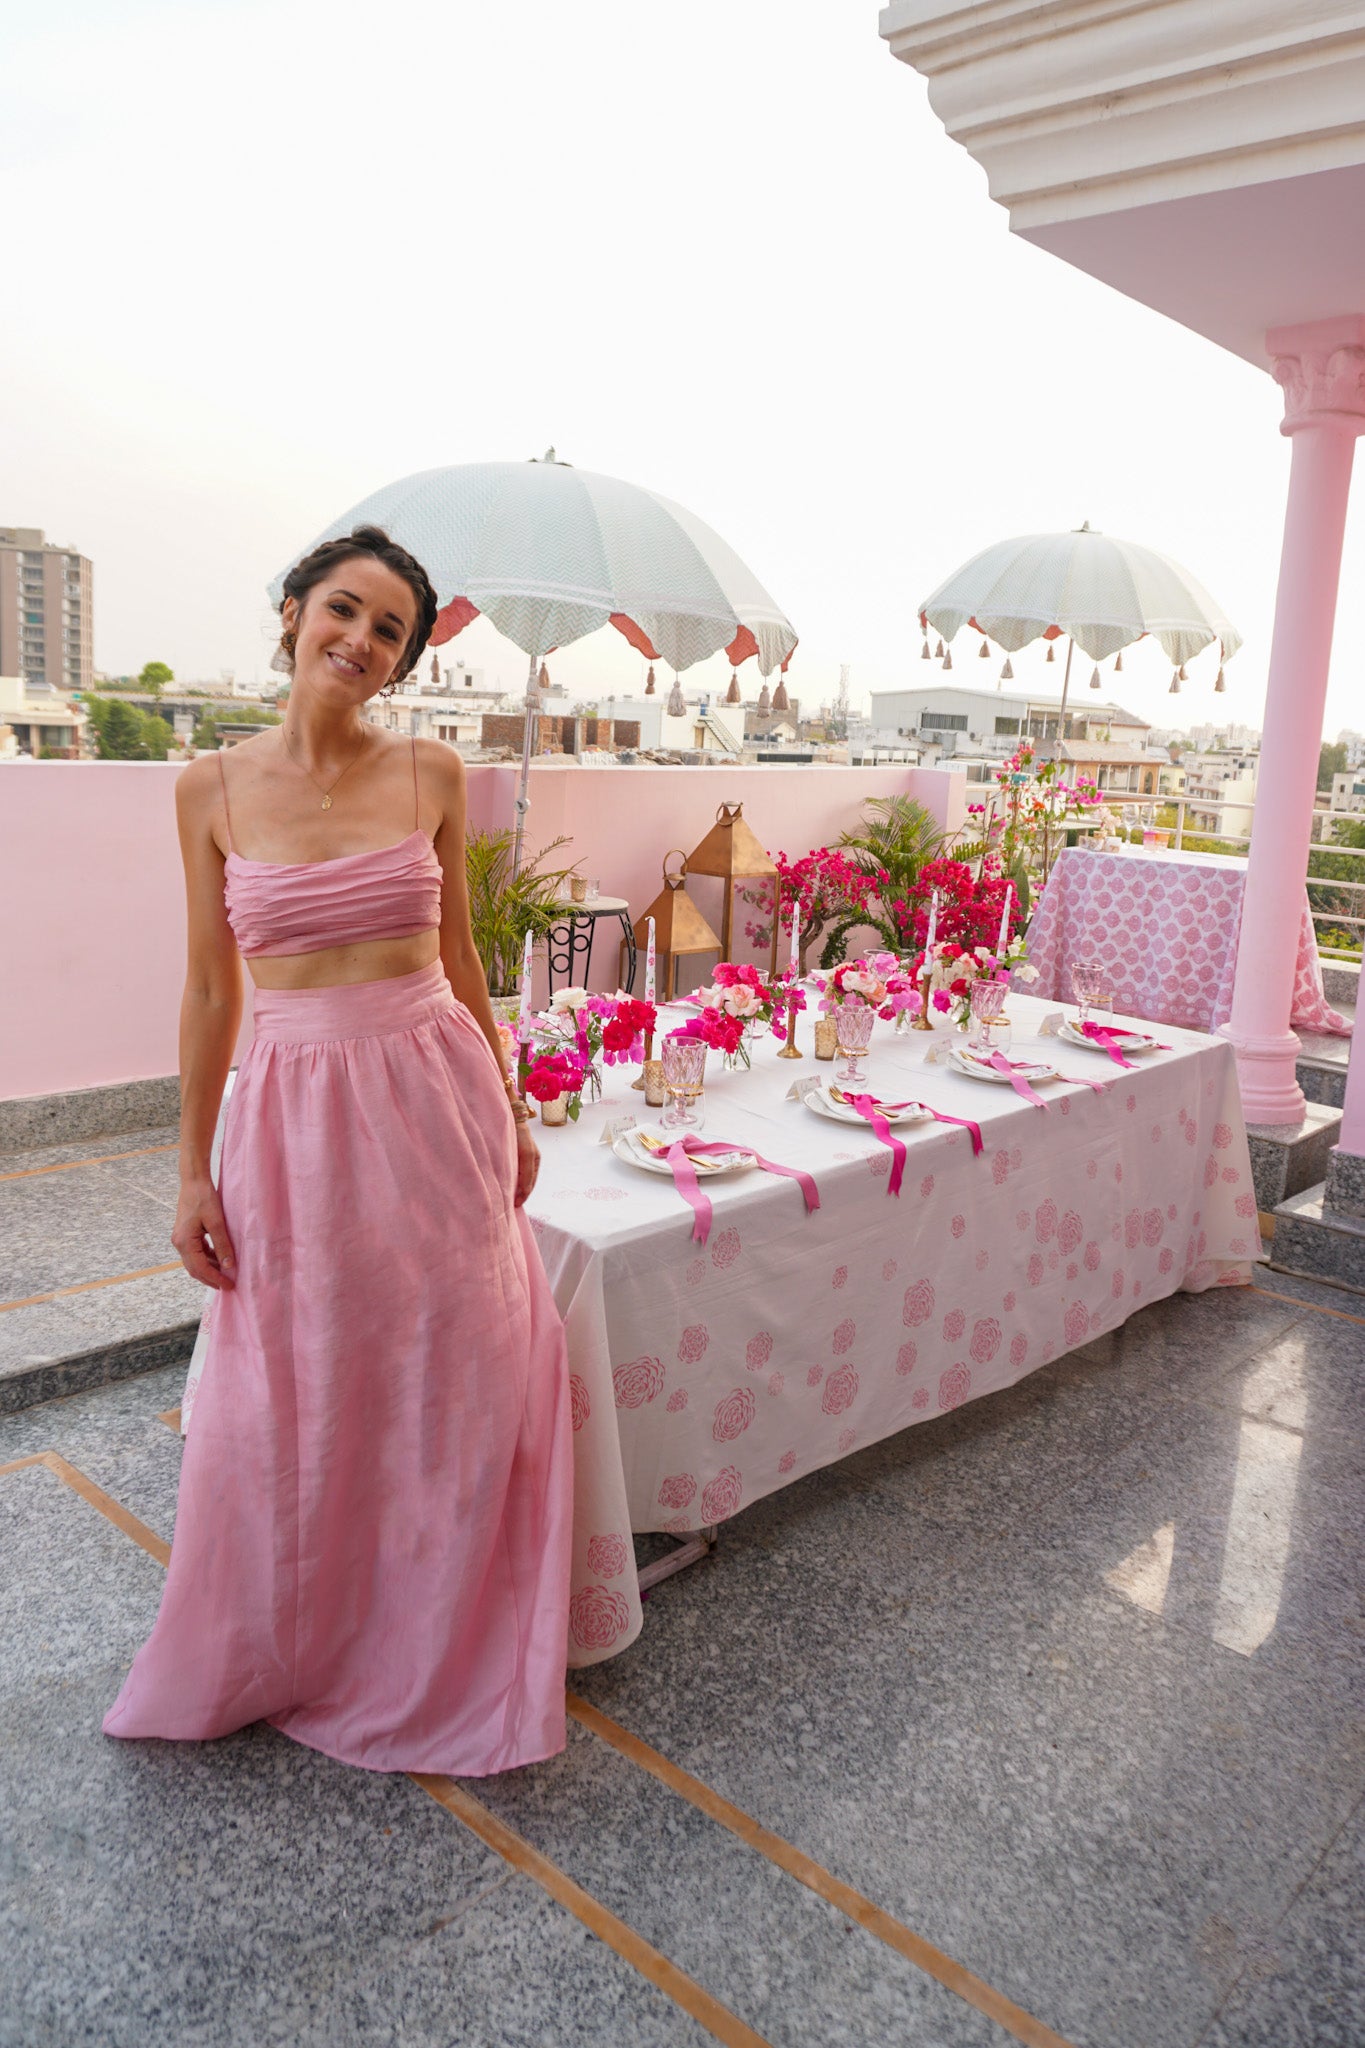 Pink tablescape in Jaipur with parasols in the background and Rosanna Falconer wearing pink skirt next to the table